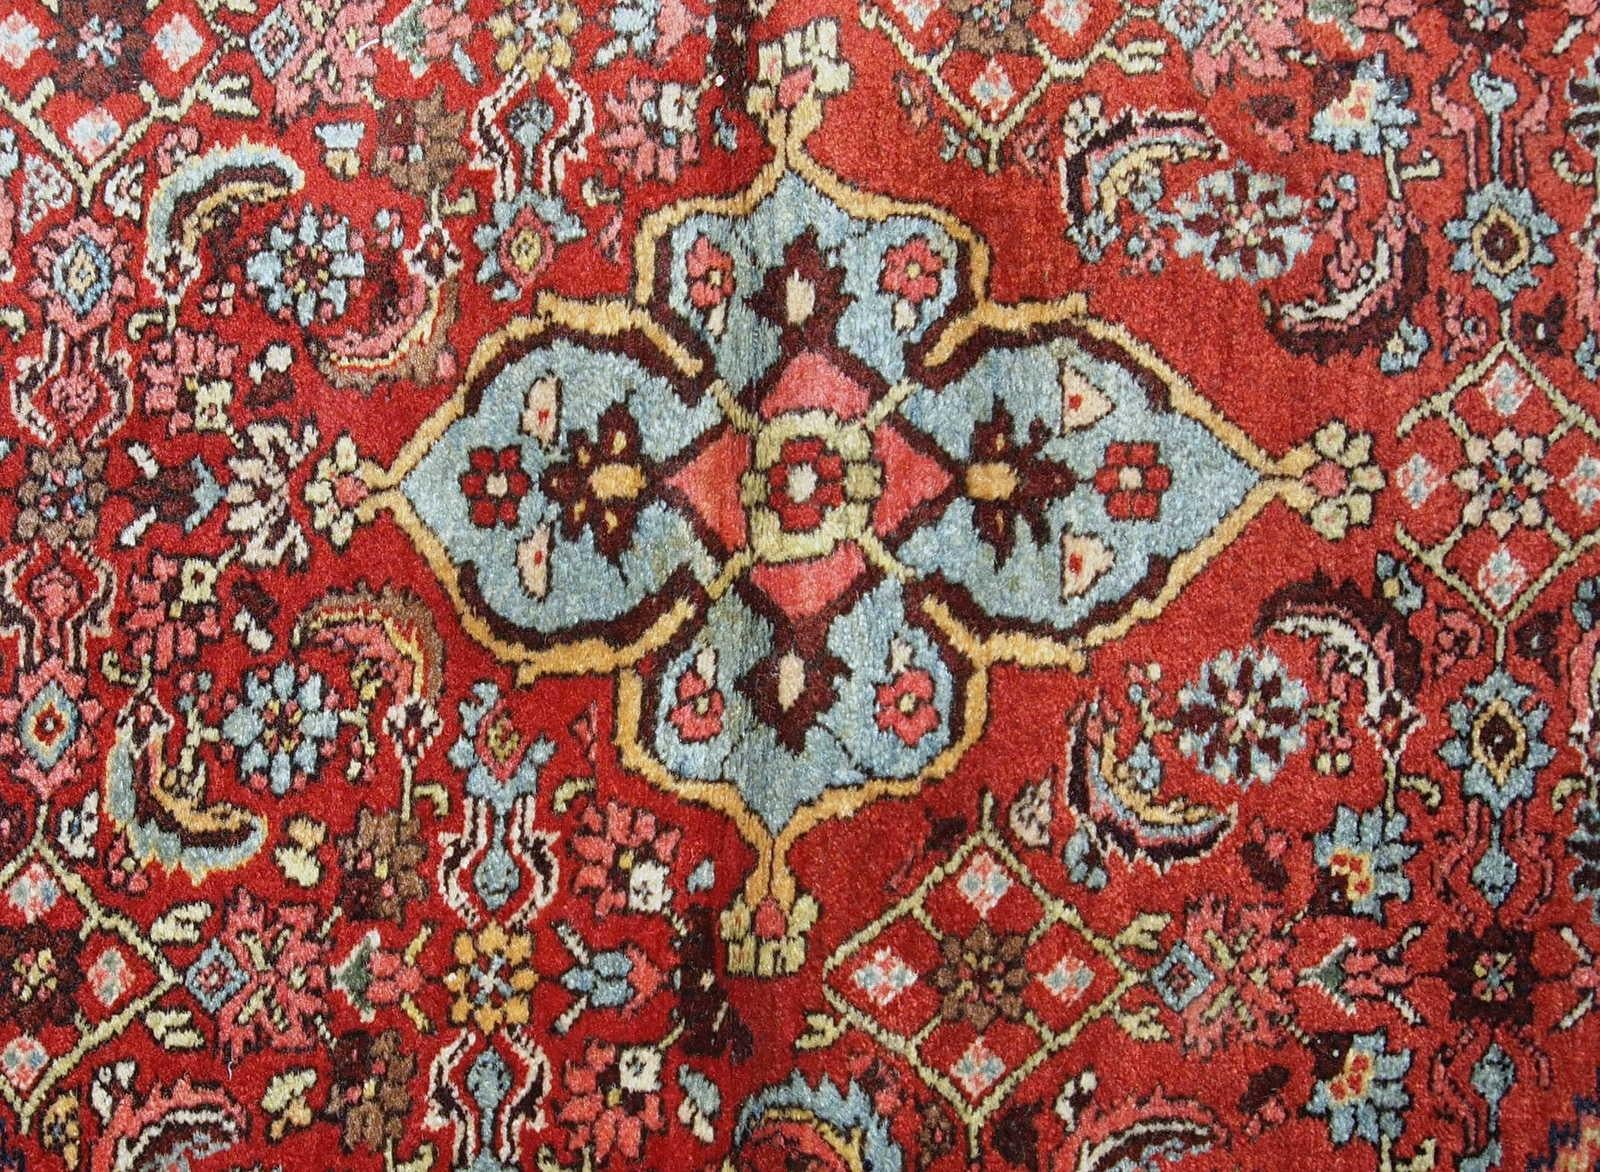 Handmade antique Bidjar rug from the beginning of 20th century. The rug is in original good condition made in red and blue wool.

?-condition: original good,

-circa: 1900s,

-size: 4.5' x 5.6' (137cm x 170cm),

-material: wool,

-country